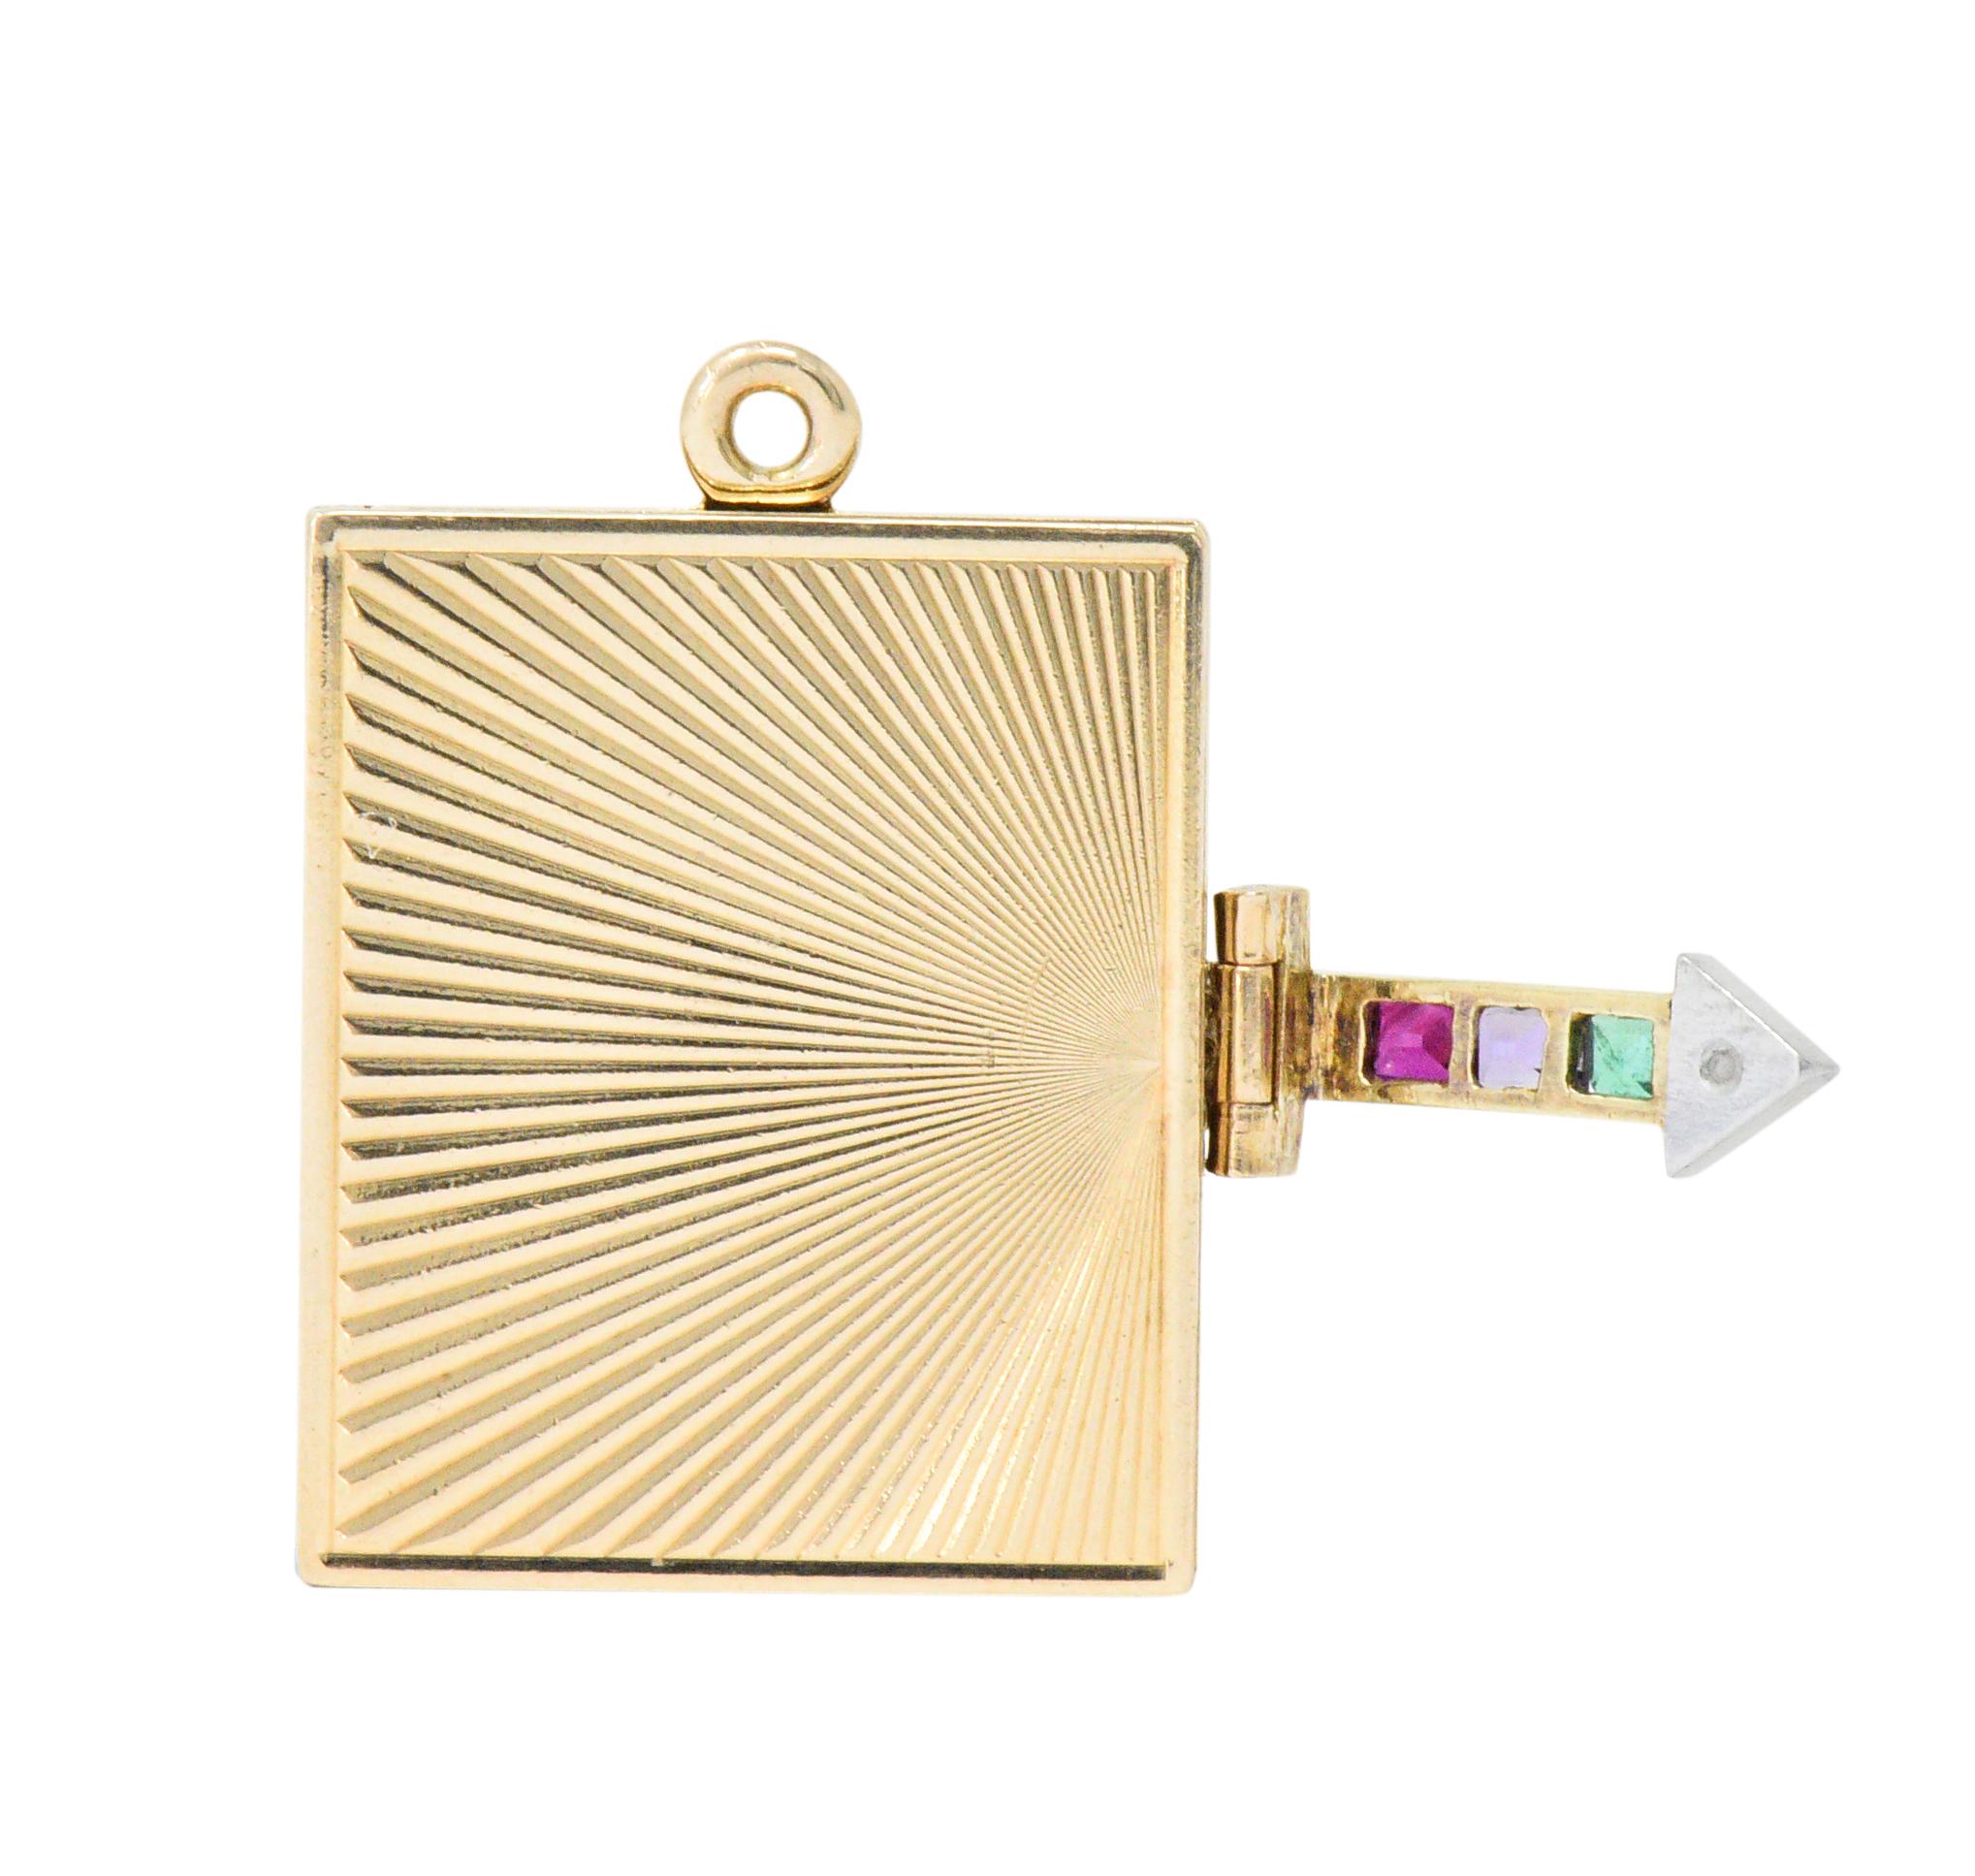 Designed as opening book with radiating ribbed gold on cover and back

Swinging arrow shaped closure set with round brilliant cut diamond and channel set straight baguette amethyst, emerald, and ruby, spelling out the word 'DEAR'

Opens to reveal